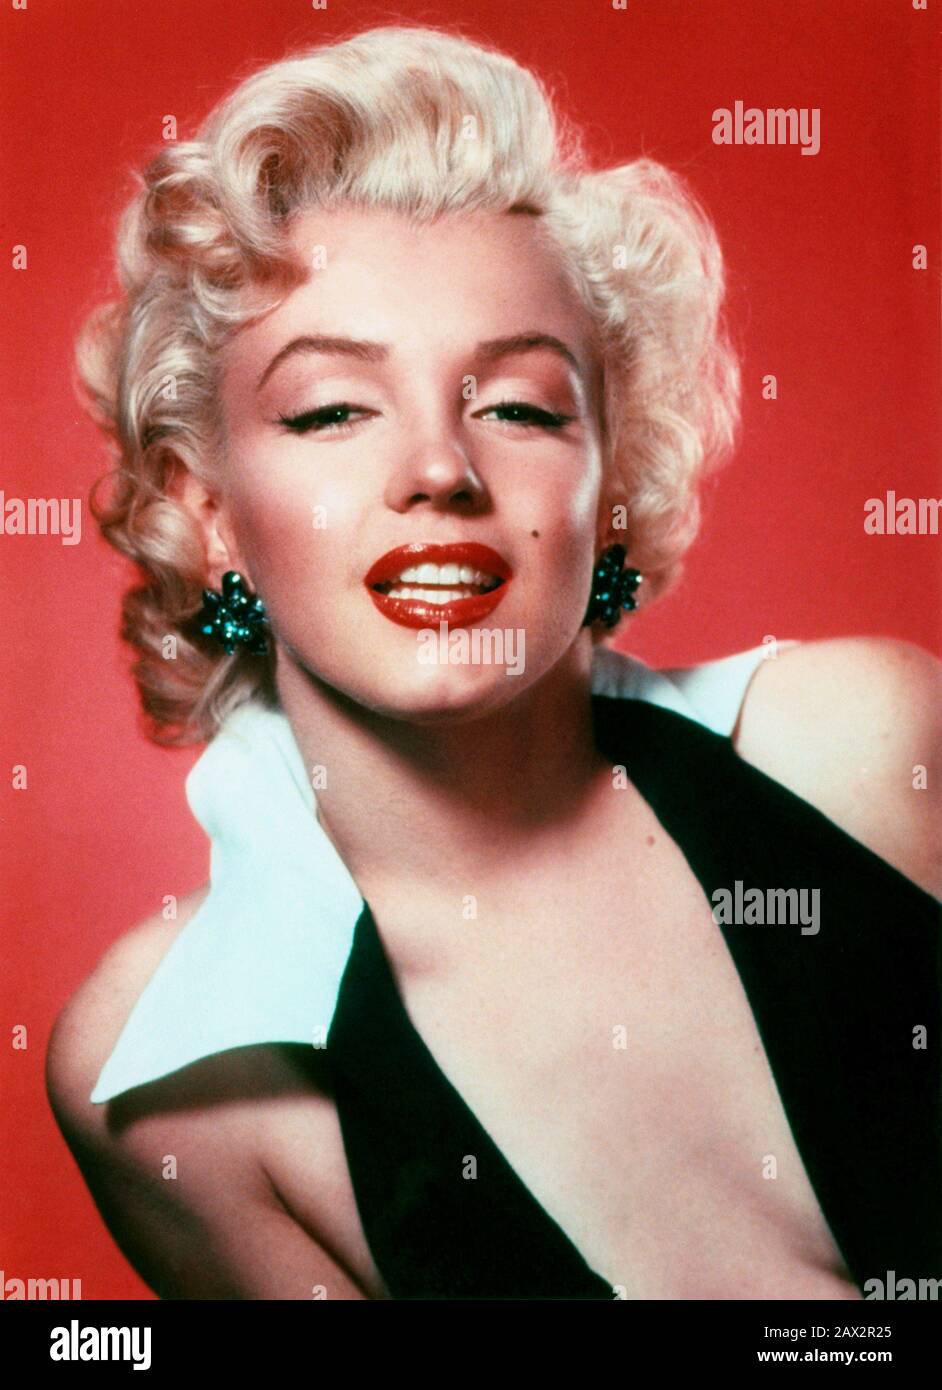 1952 , USA : The movie actress MARILYN MONROE ( 1926 - 1962 ) . Pubblicity  still . Photo by Frank Powolny . - CINEMA - portrait - ritratto - smile -